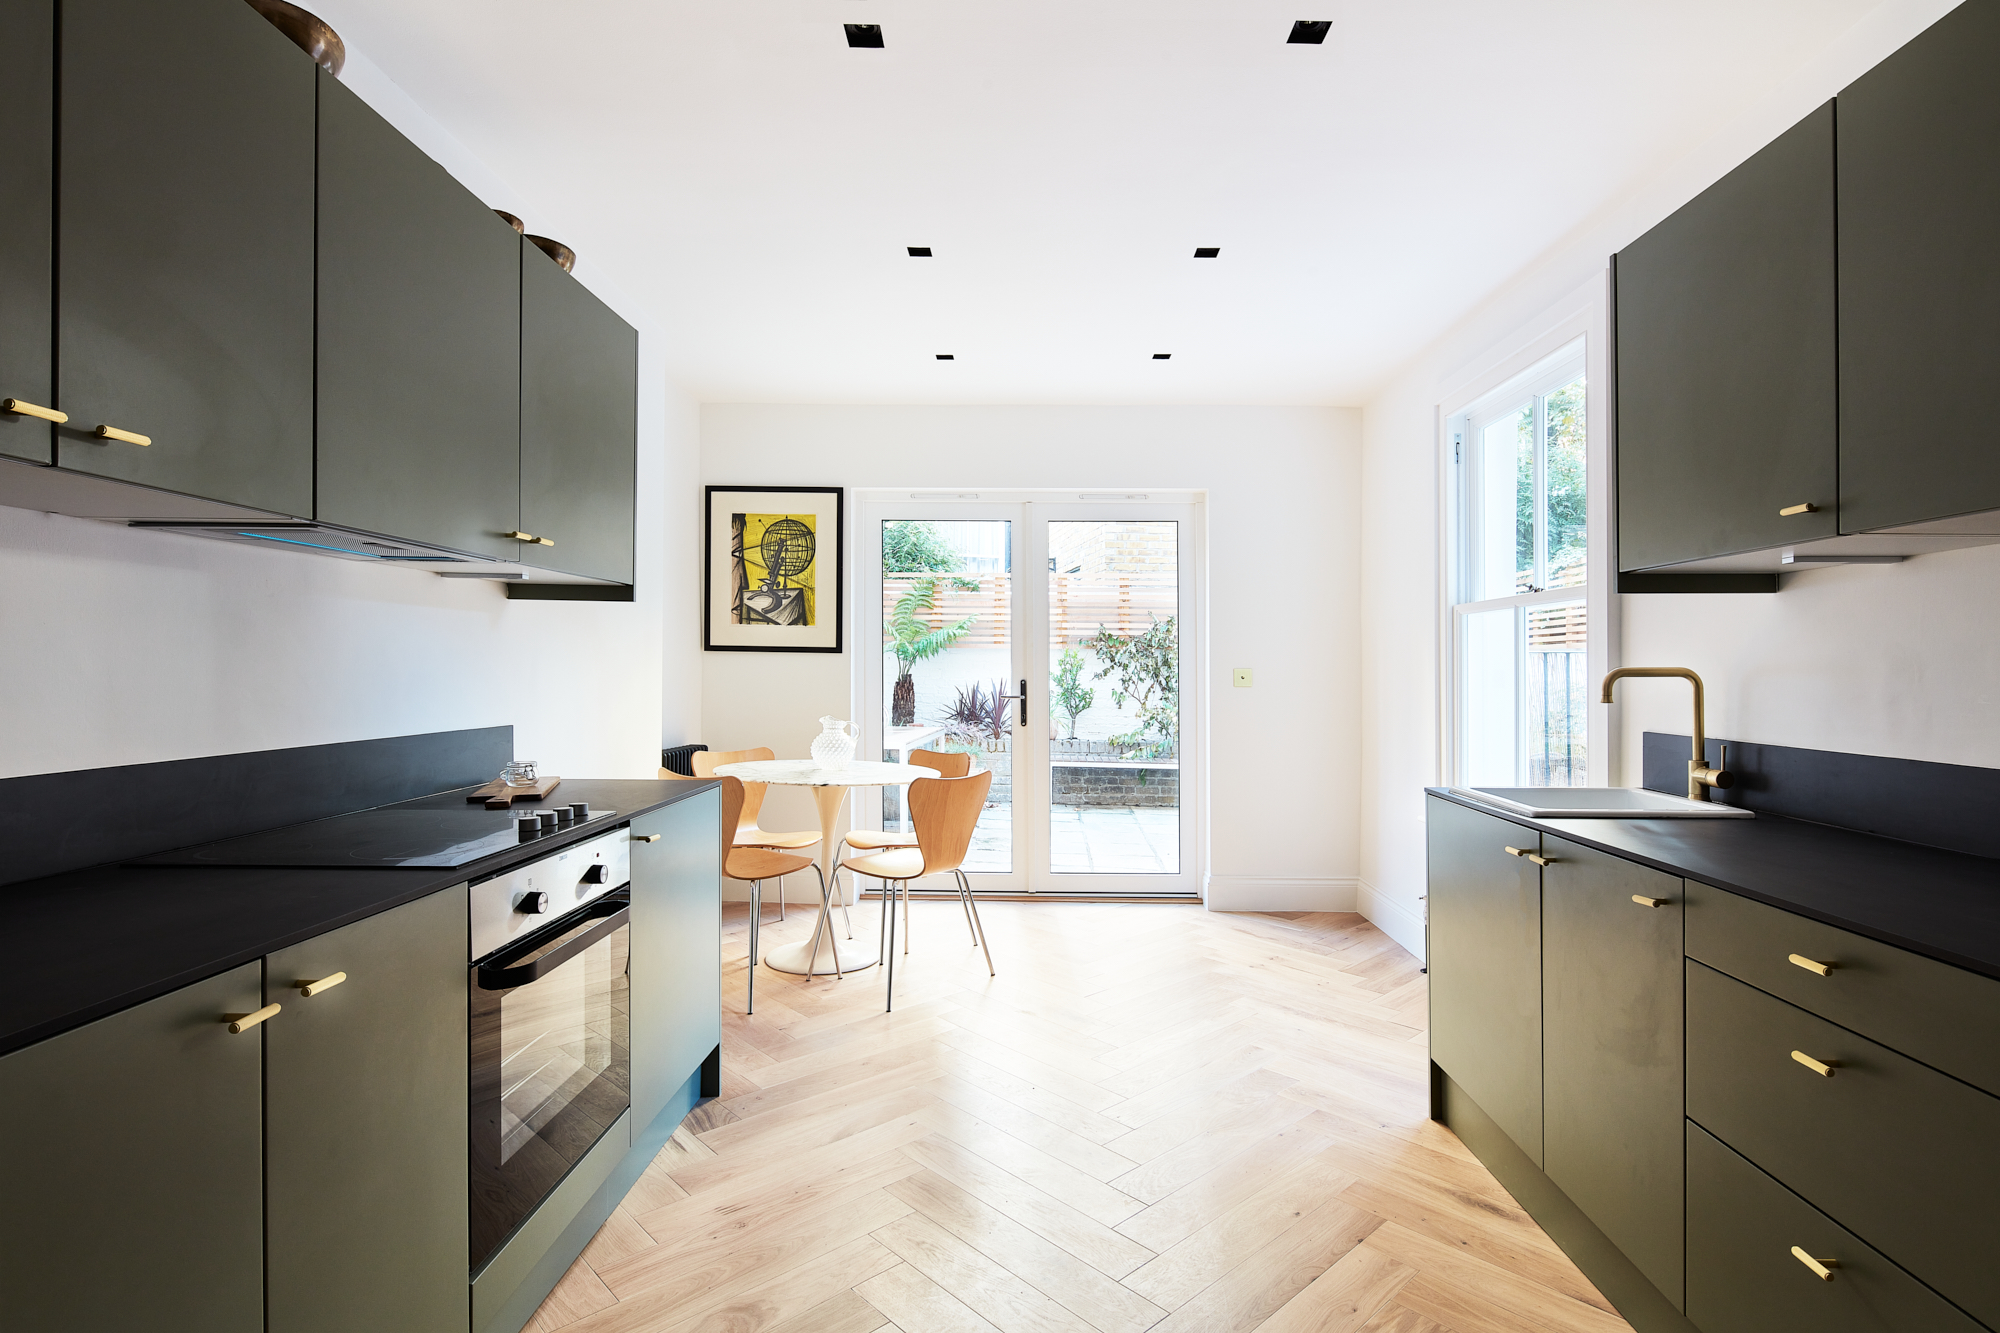 For Sale: Westbourne Gardens Notting Hill W11 contemporary galley kitchen